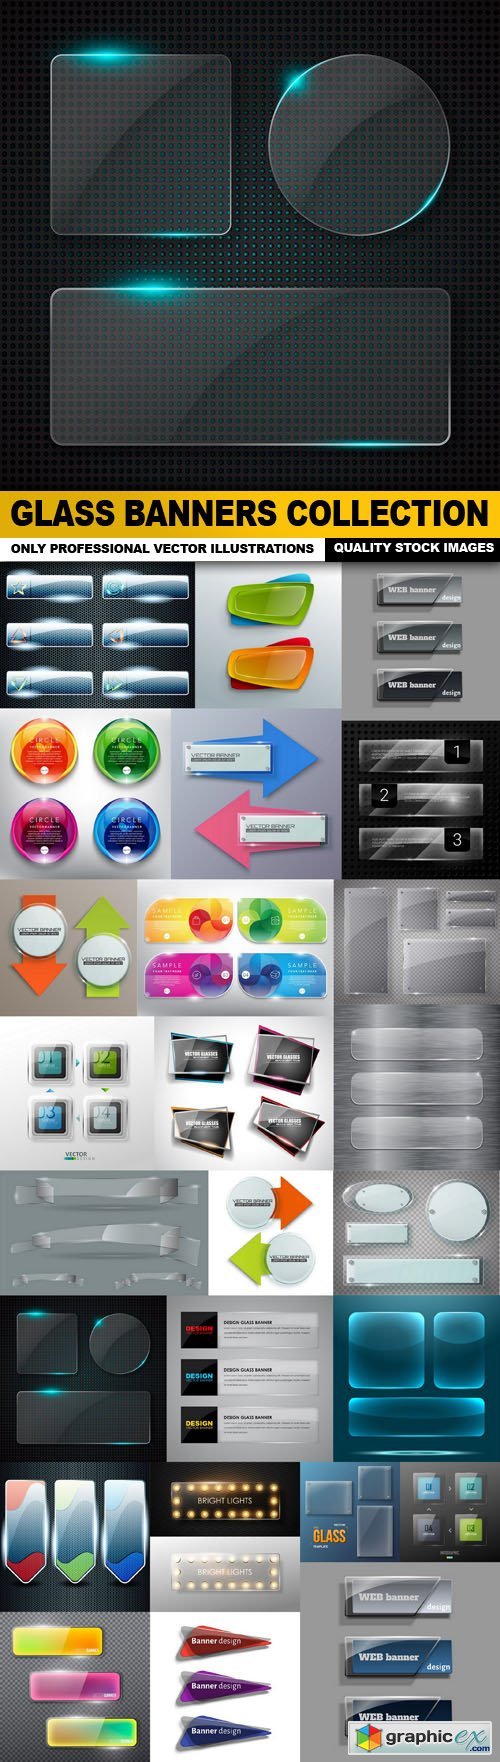 Glass Banners Collection - 25 Vector